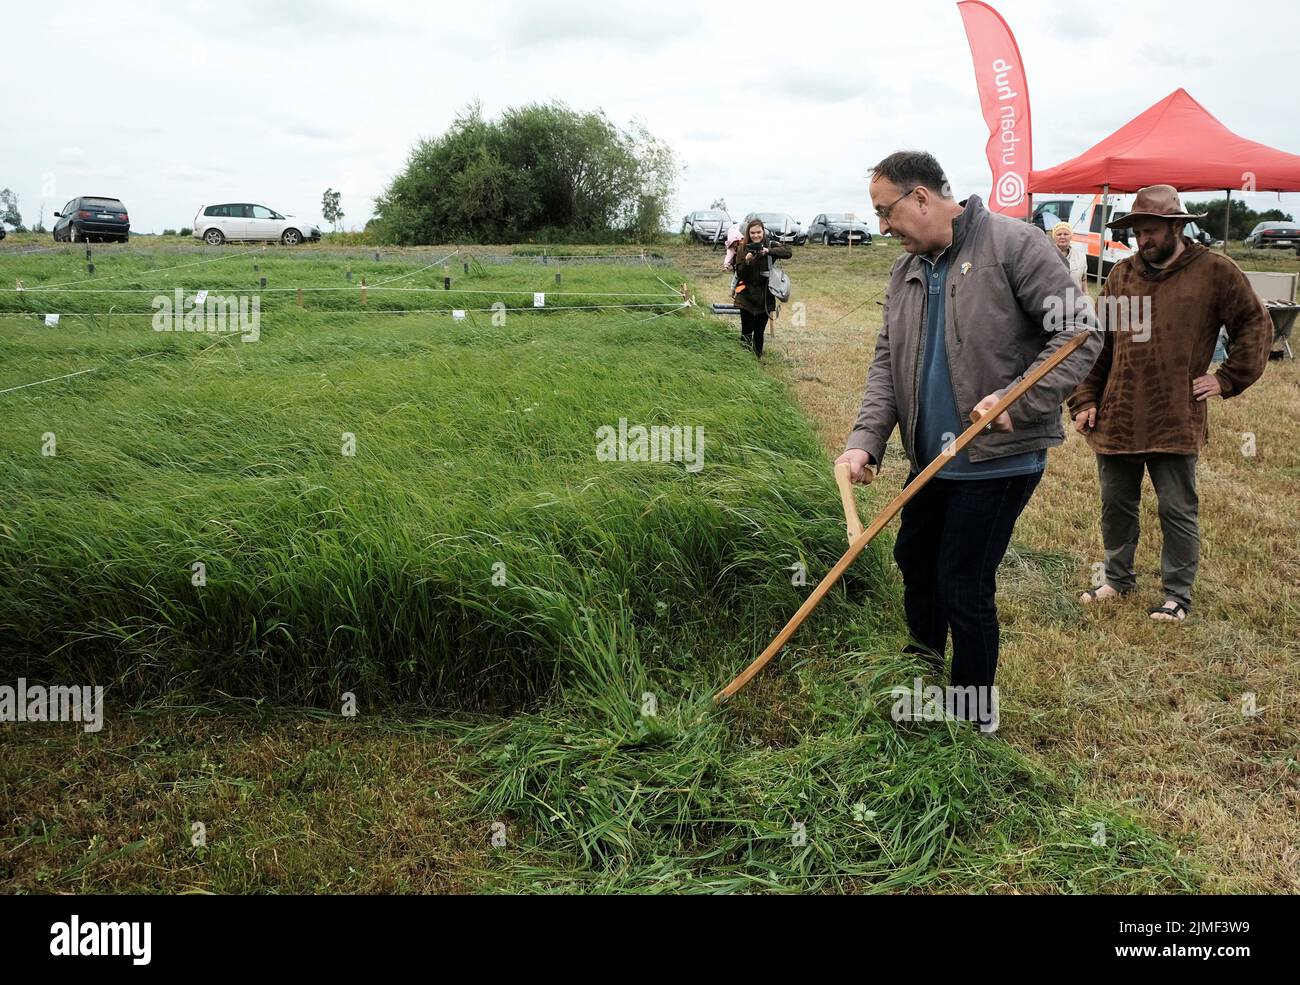 U.S. Ambassador to Lithuania Robert S. Gilchrist tries to use a scythe during Lithuanian mowing championship to cut down grass using scythes in Rupkalviai, Lithuania  August 6, 2022. REUTERS/Ints Kalnins Stock Photo